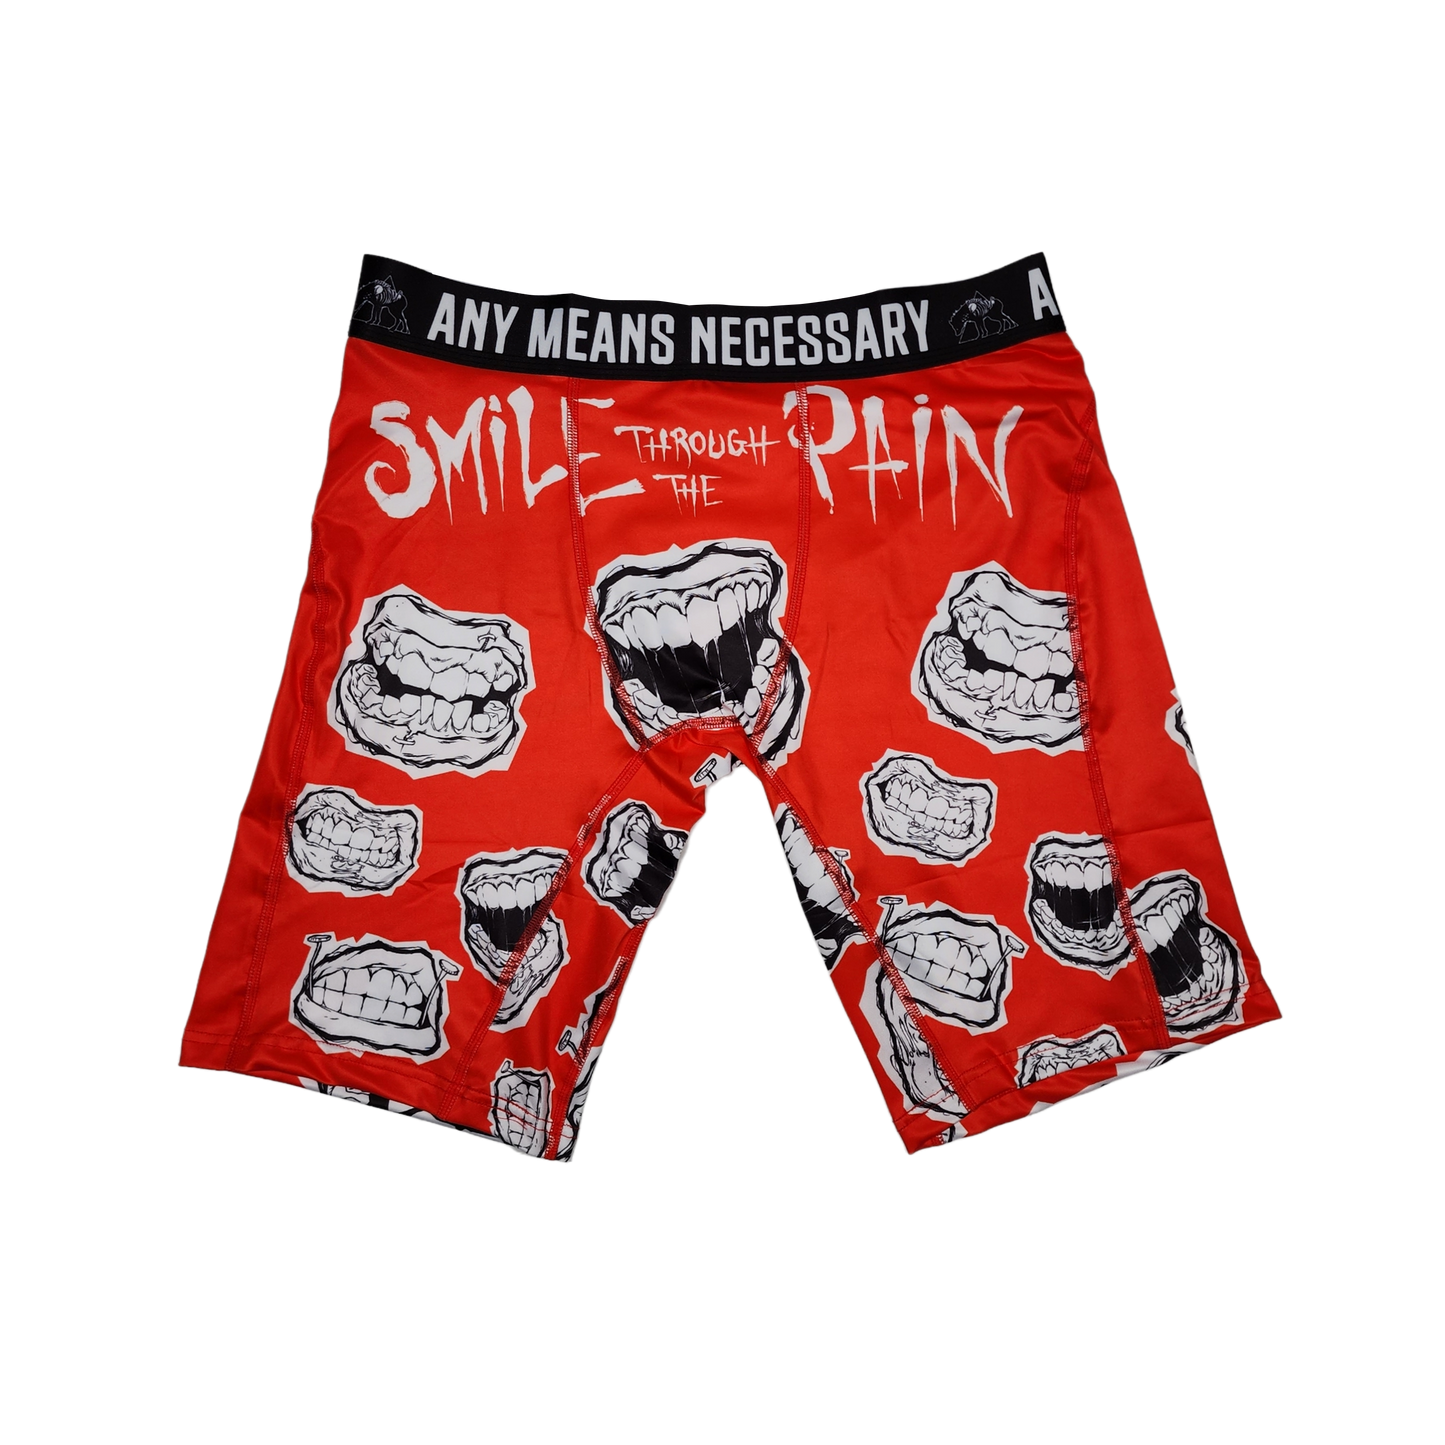 Smile Through The Pain Men's Underwear Red – Any Means Necessary